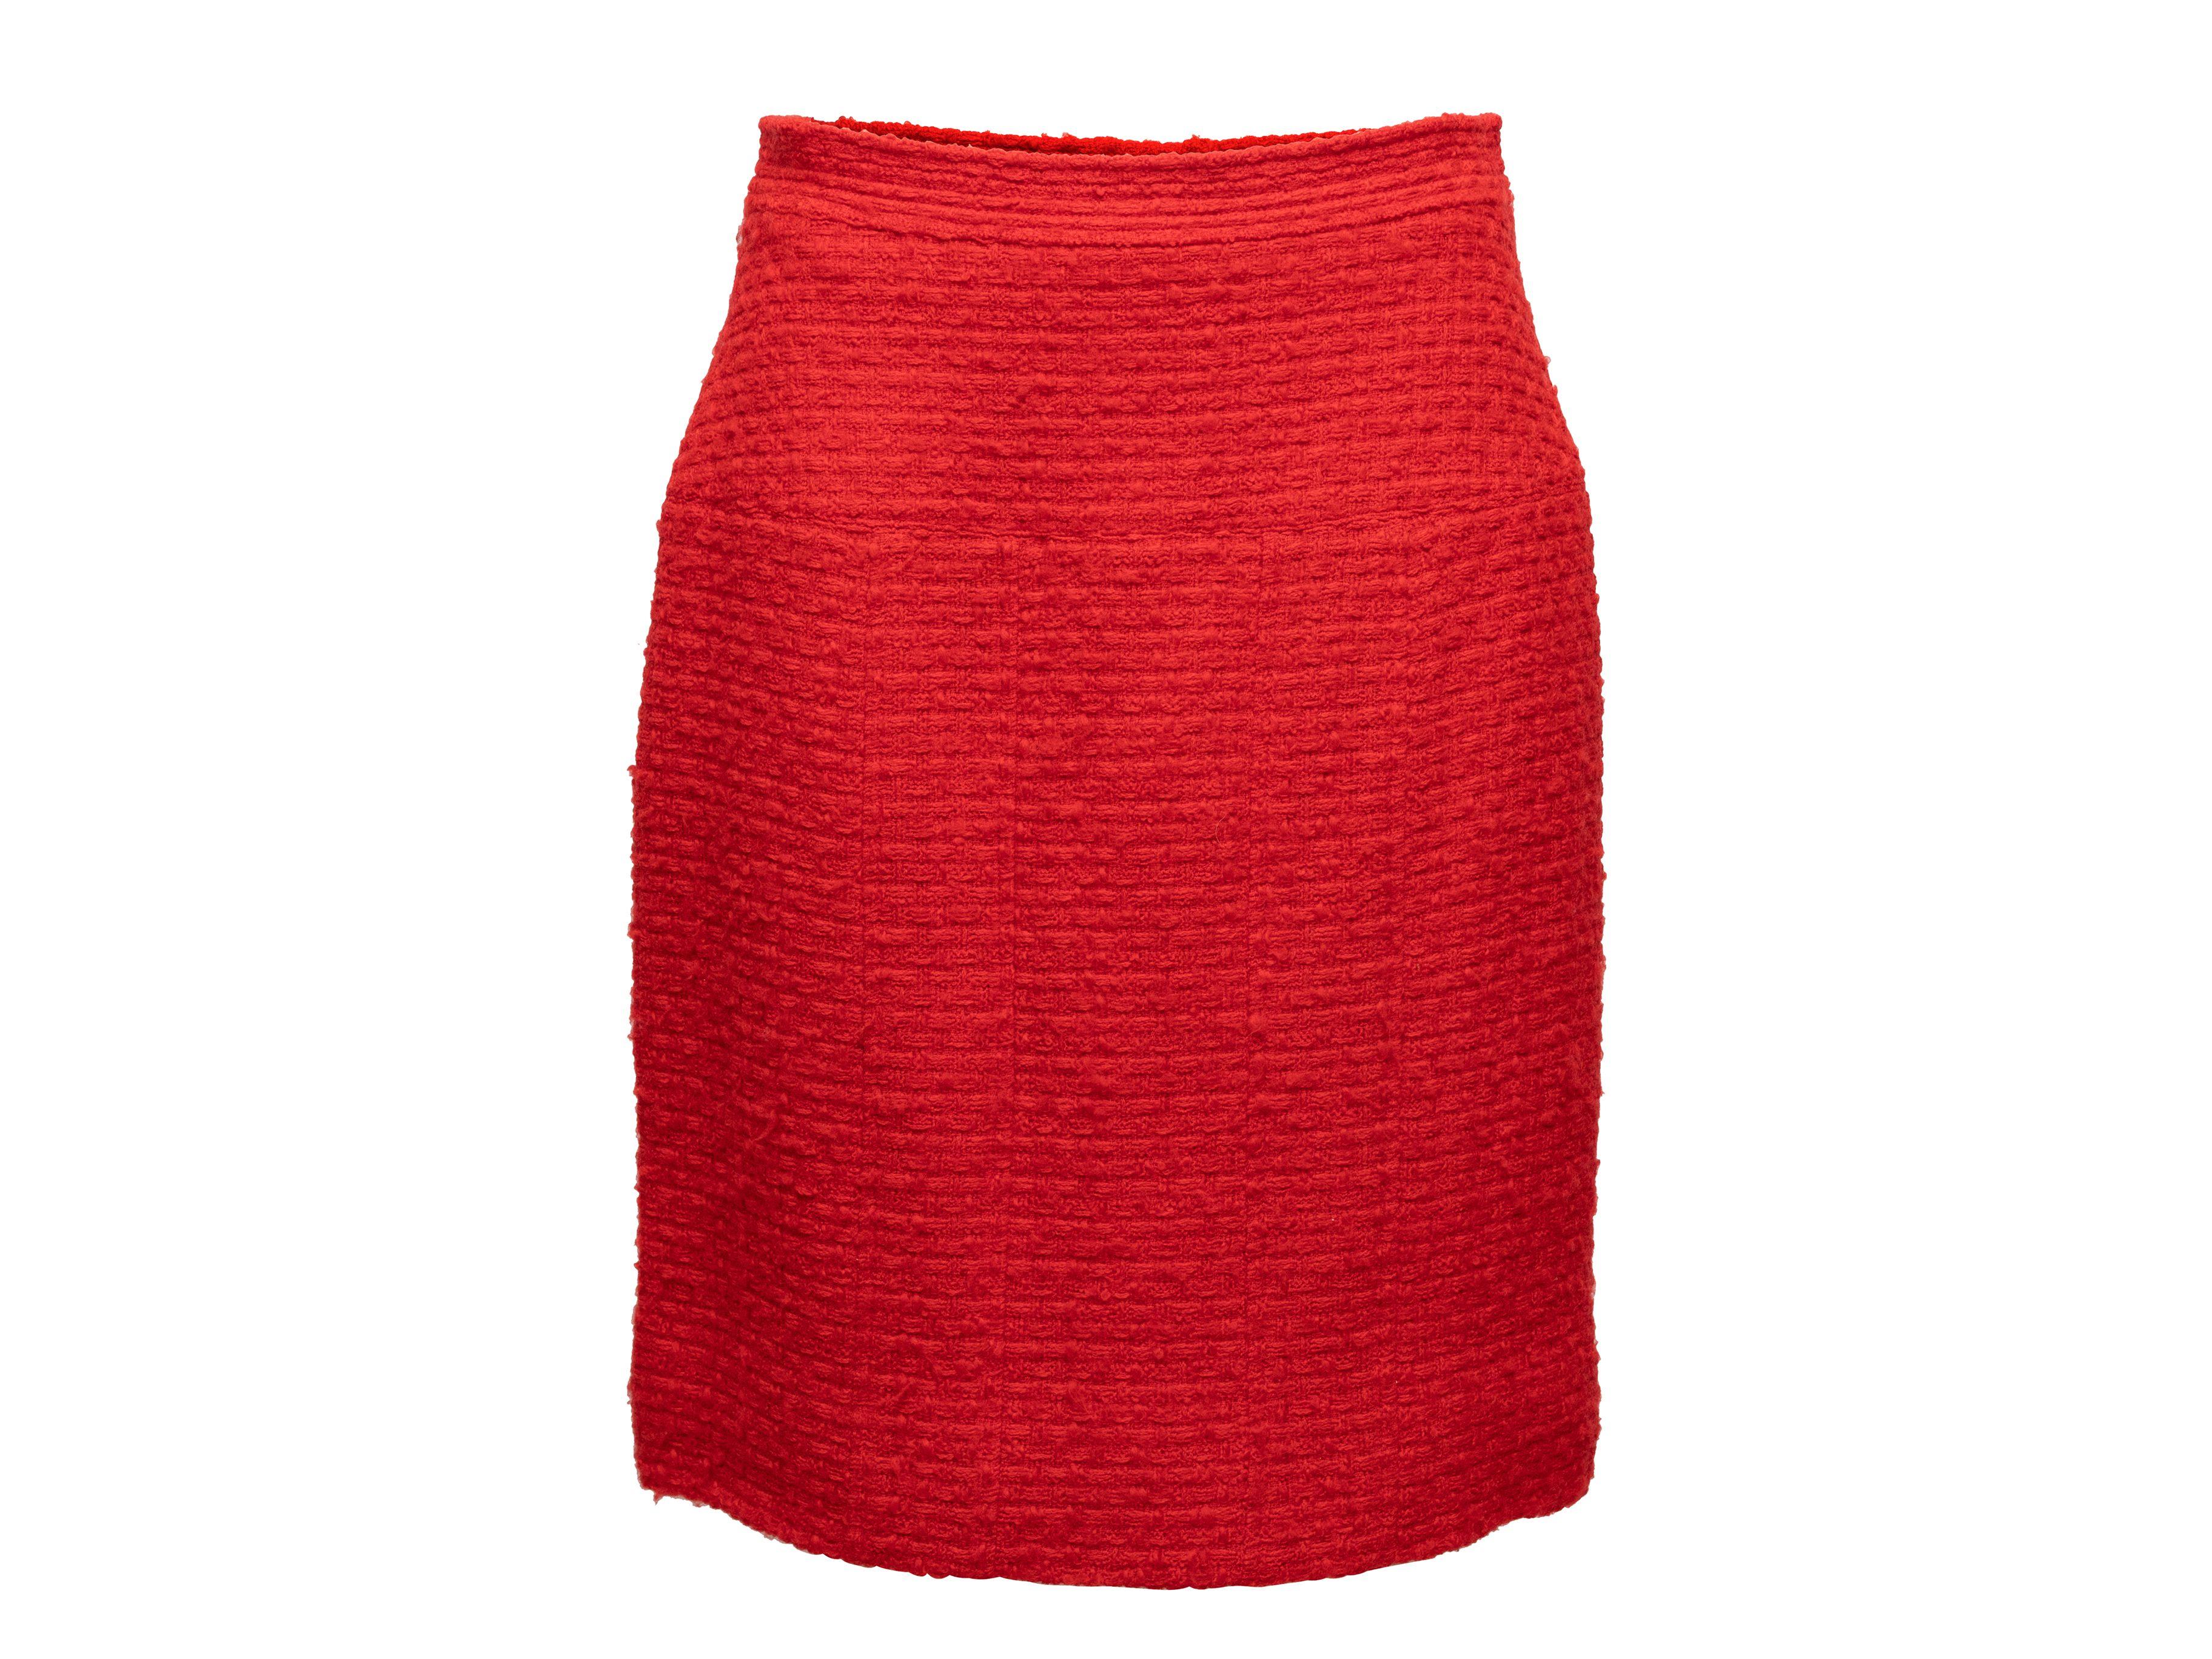 Women's Chanel Red Boutique Tweed Pencil Skirt